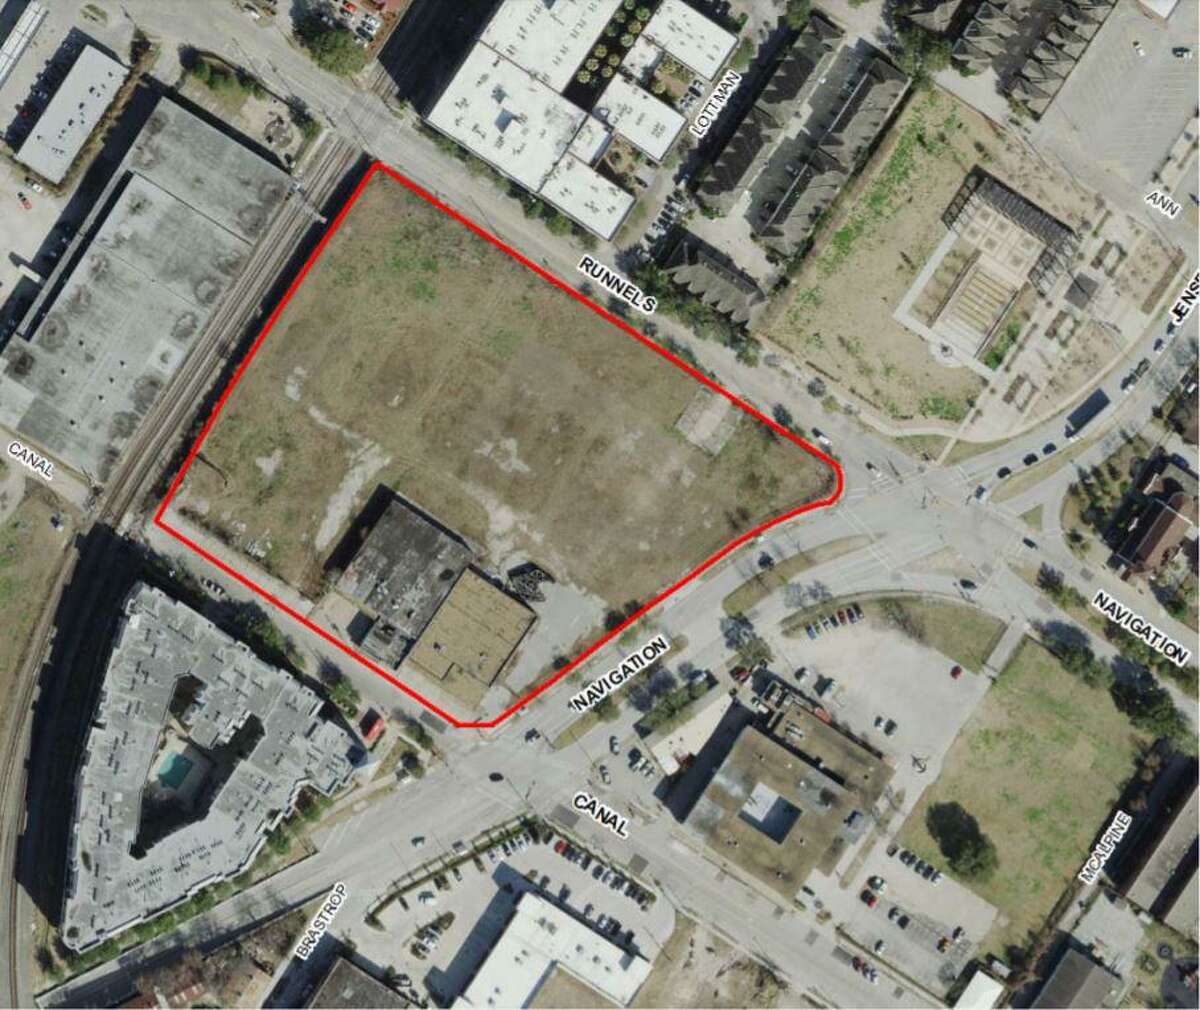 Triten Real Estate Partners is planning a mixed-use development on six acres in the East End. The Houston-based company submitted plans to the city of Houston with a variance request.